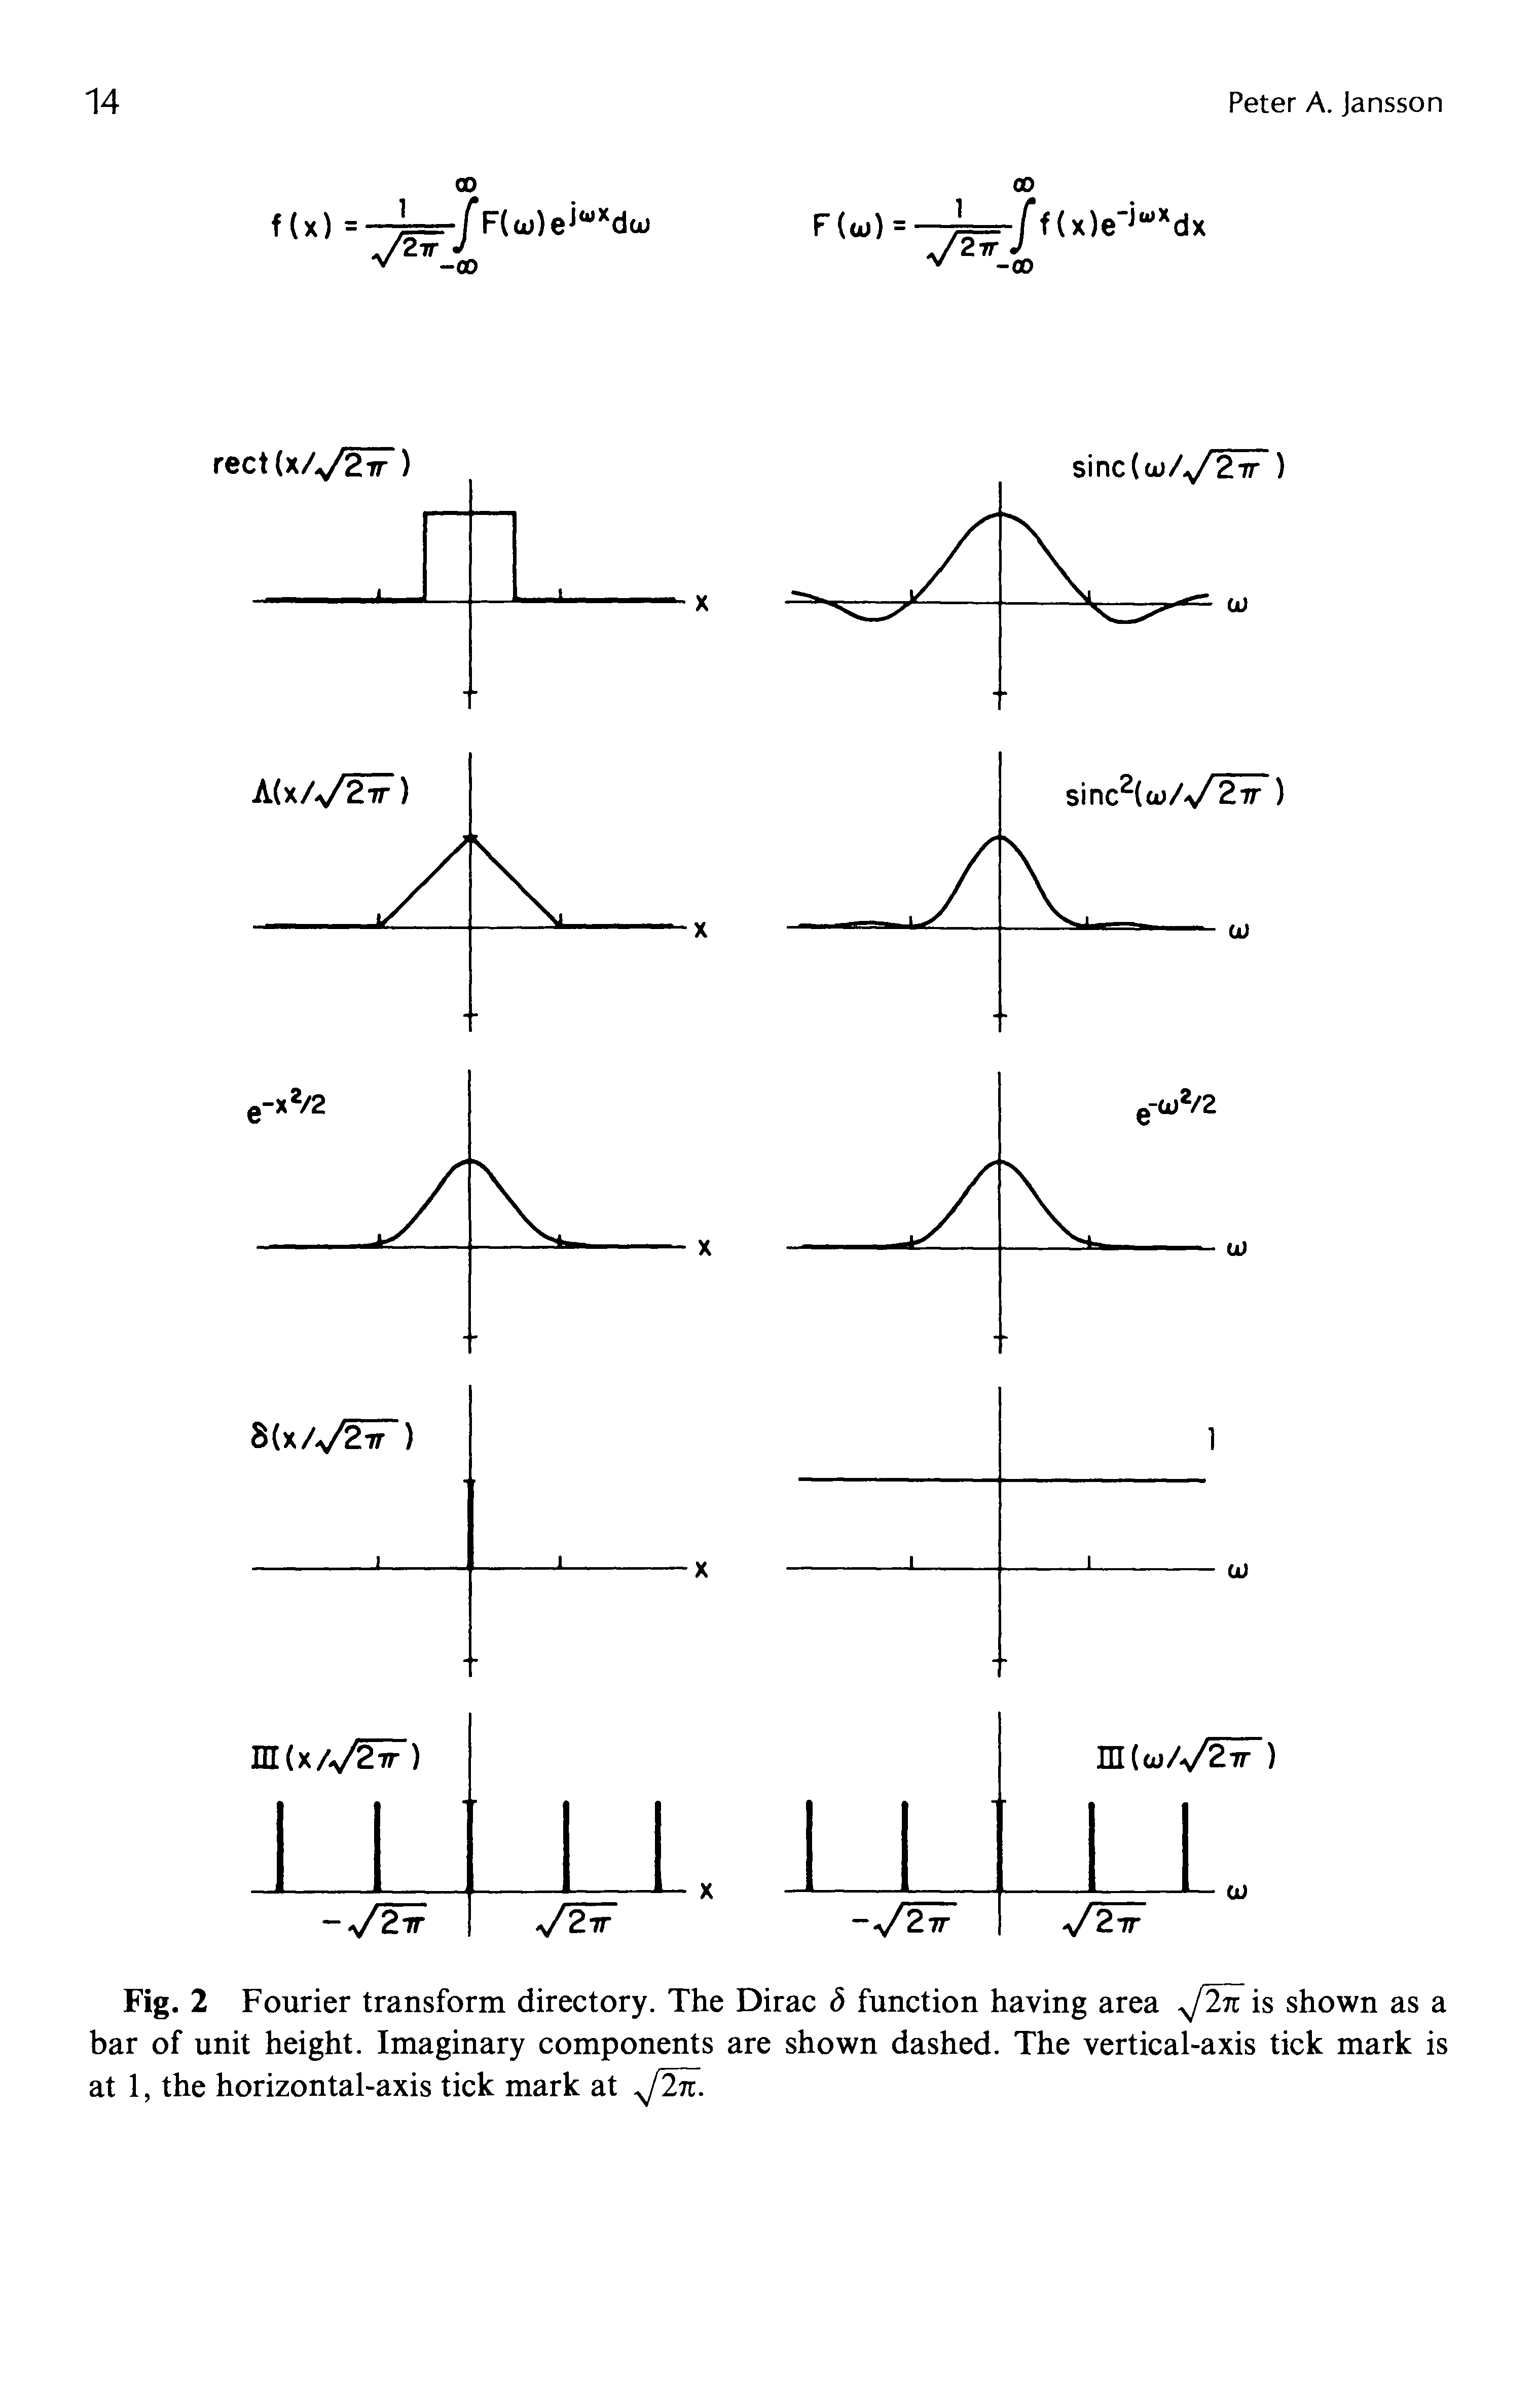 Fig. 2 Fourier transform directory. The Dirac S function having area y/2n is shown as a bar of unit height. Imaginary components are shown dashed. The vertical-axis tick mark is at 1, the horizontal-axis tick mark at /2n.